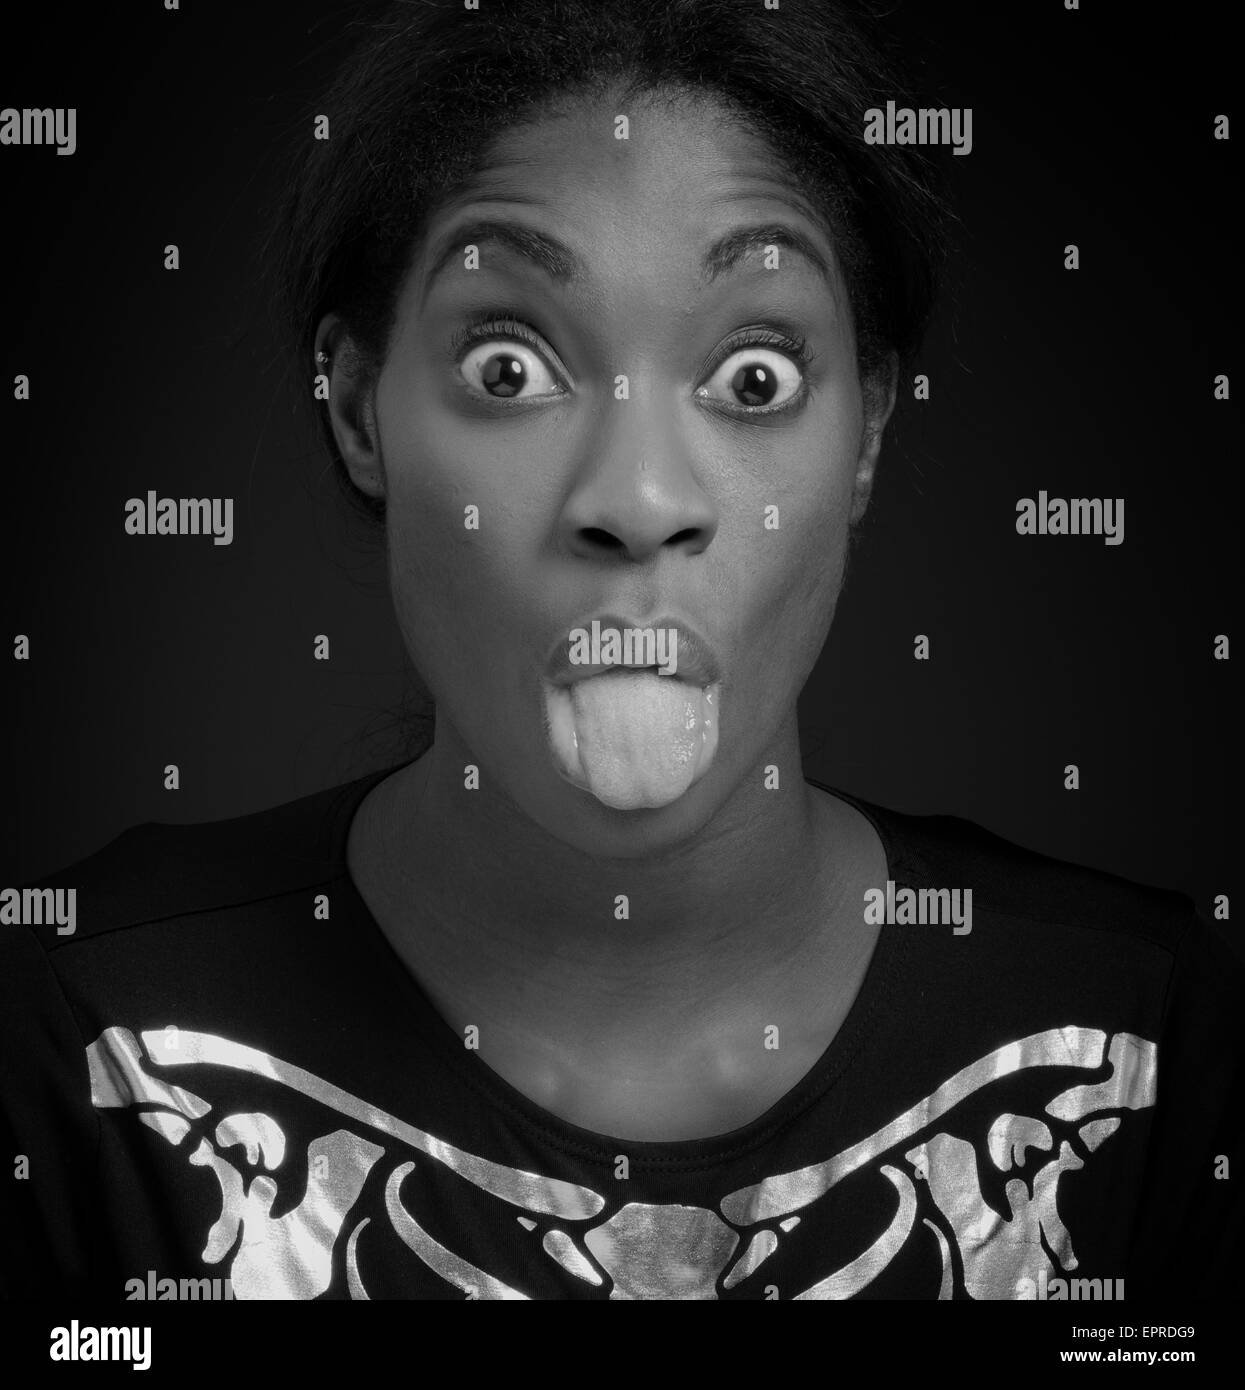 African Girl Sticking Out Tongue Black And White Stock Photos Images